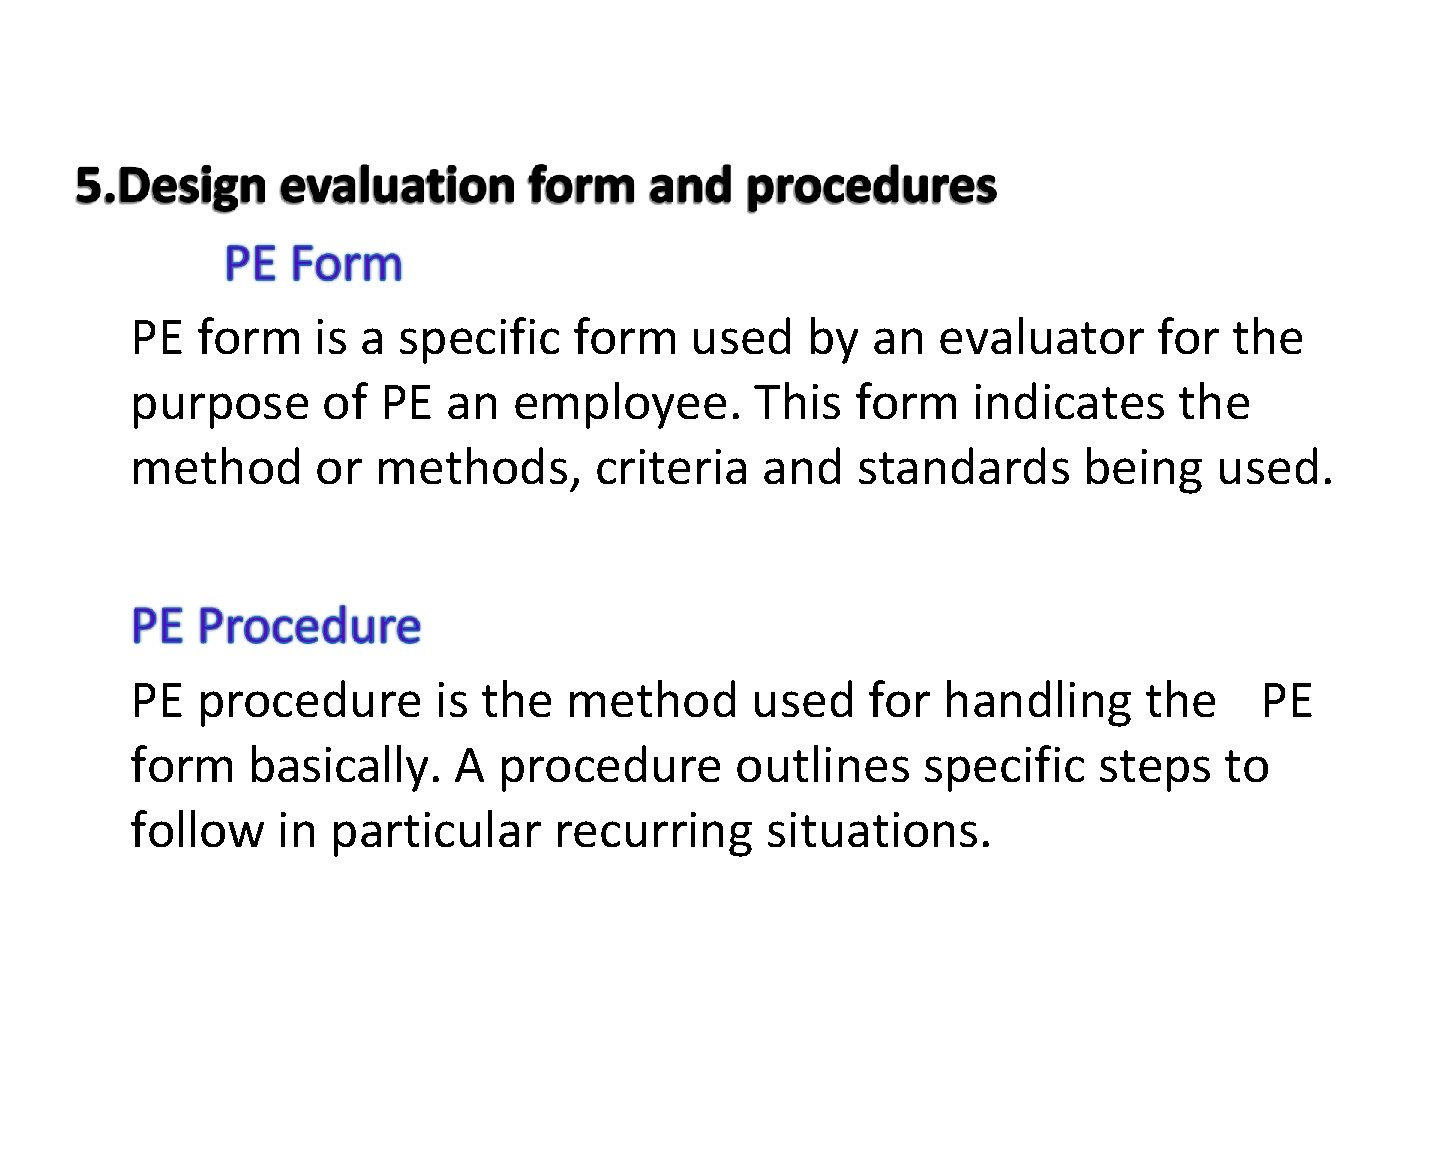 PE form is a specific form used by an evaluator for the purpose of